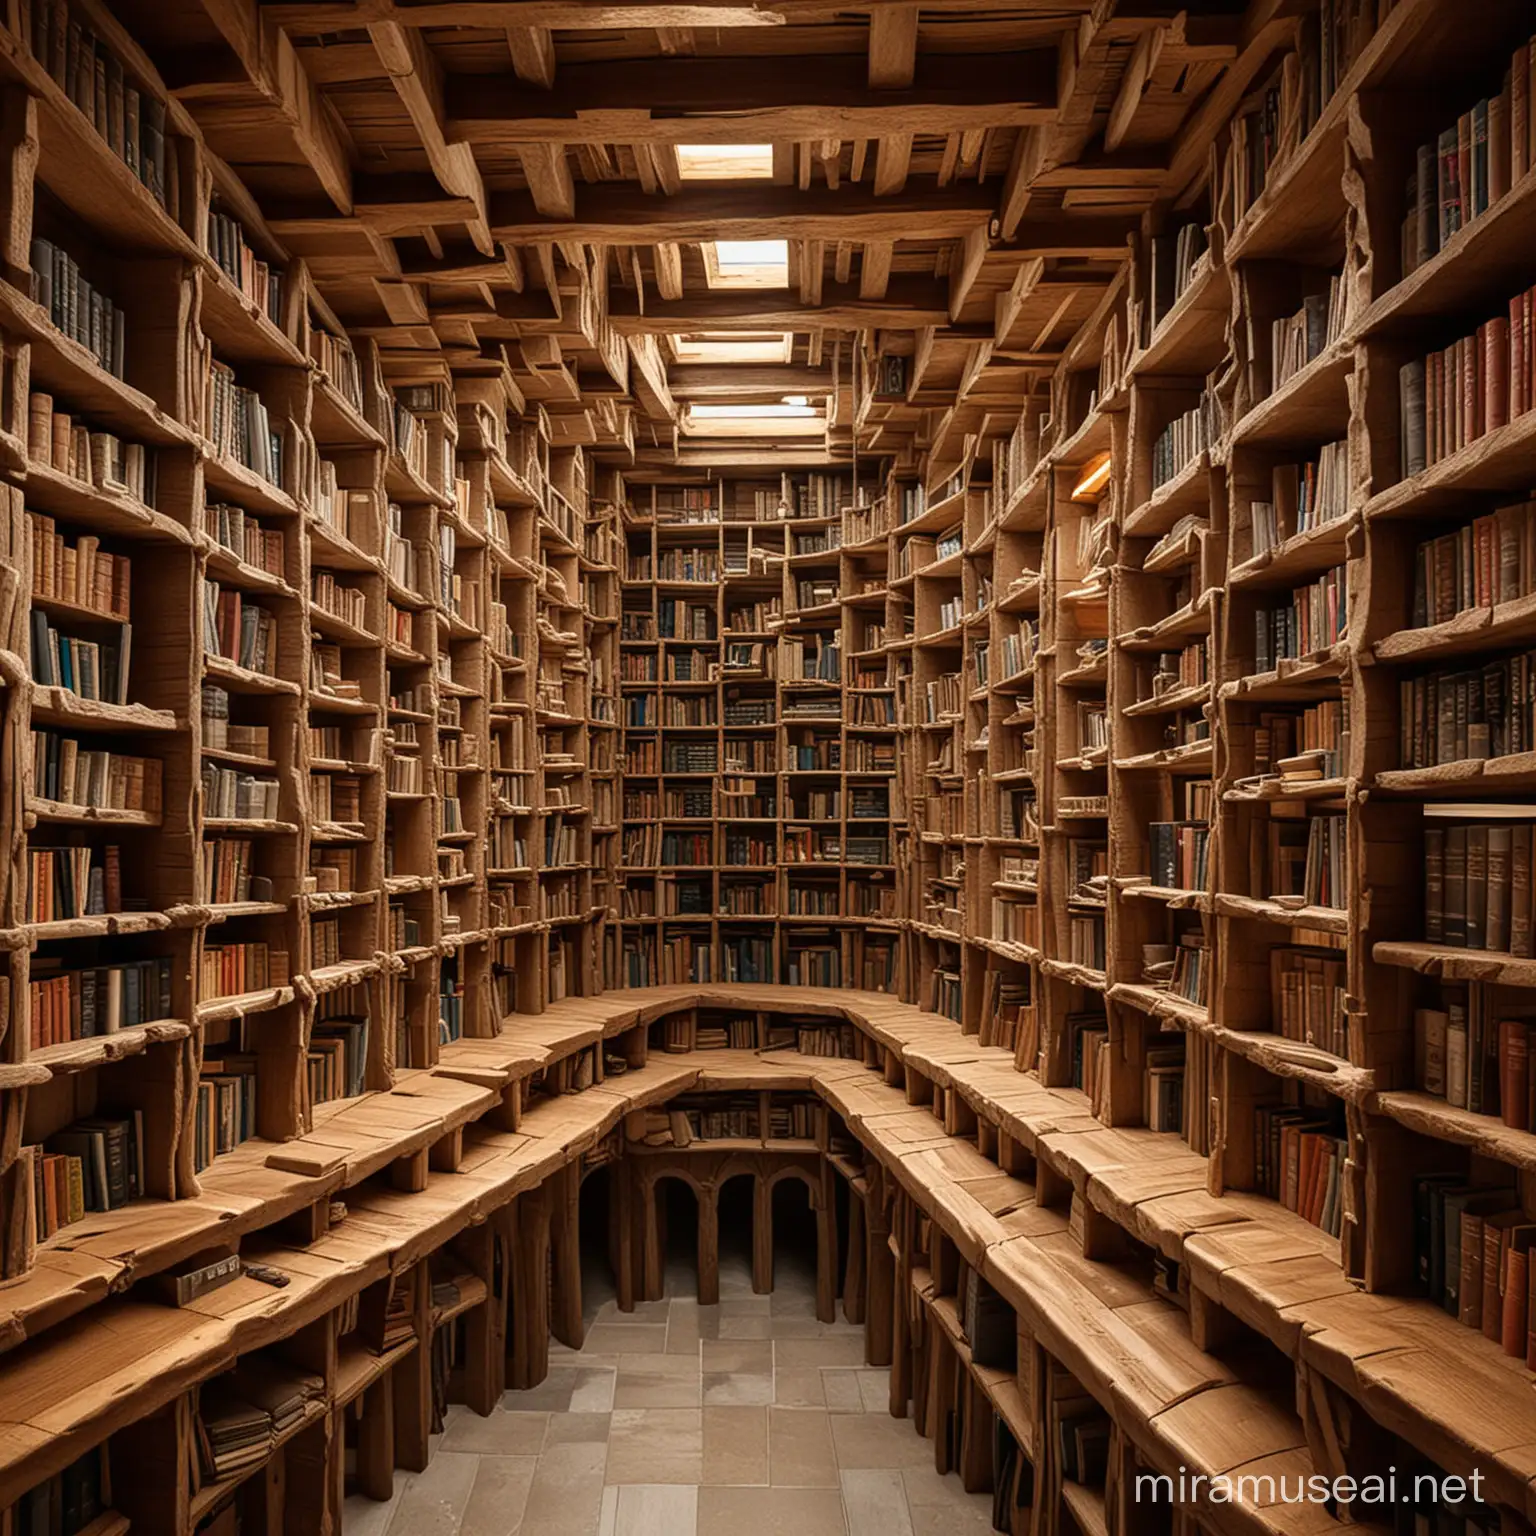 Mysterious Underground Labyrinth with Wooden and Infinite Knowledge